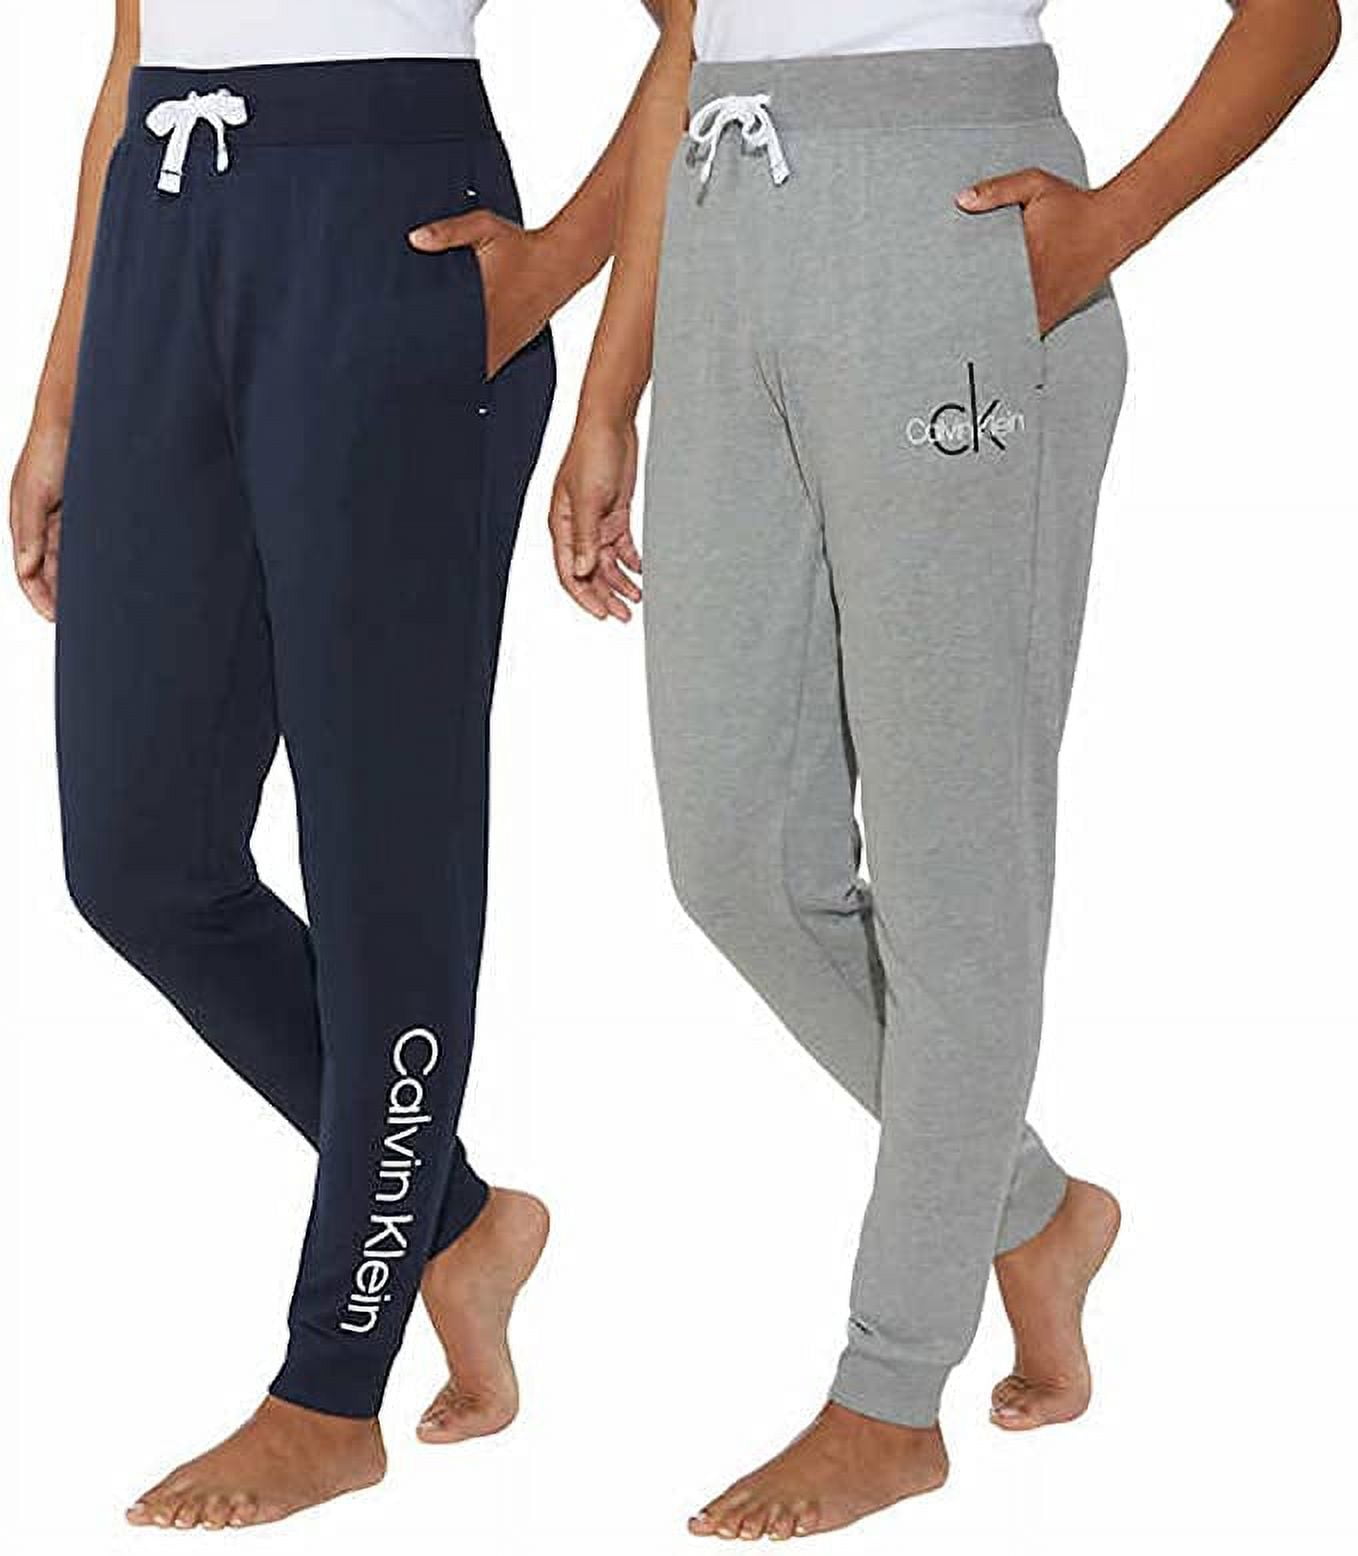 Calvin Klein Ladies' French Terry Joggers 2-Pack, Blue/Gray Small 